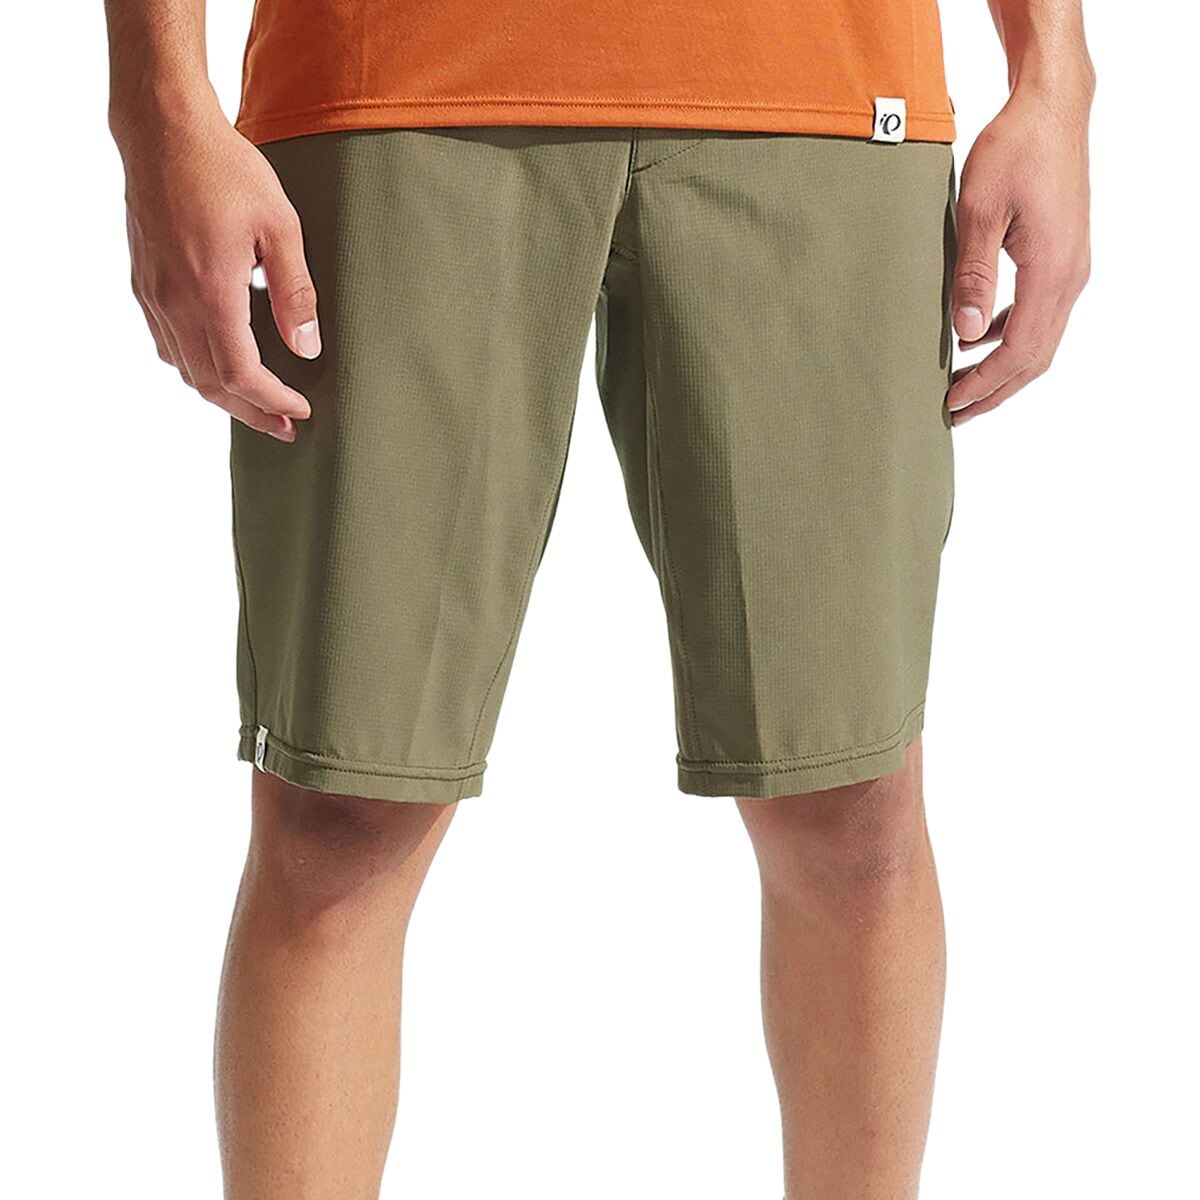 PEARL iZUMi Canyon Short With Liner - Men's Dark Olive, 36